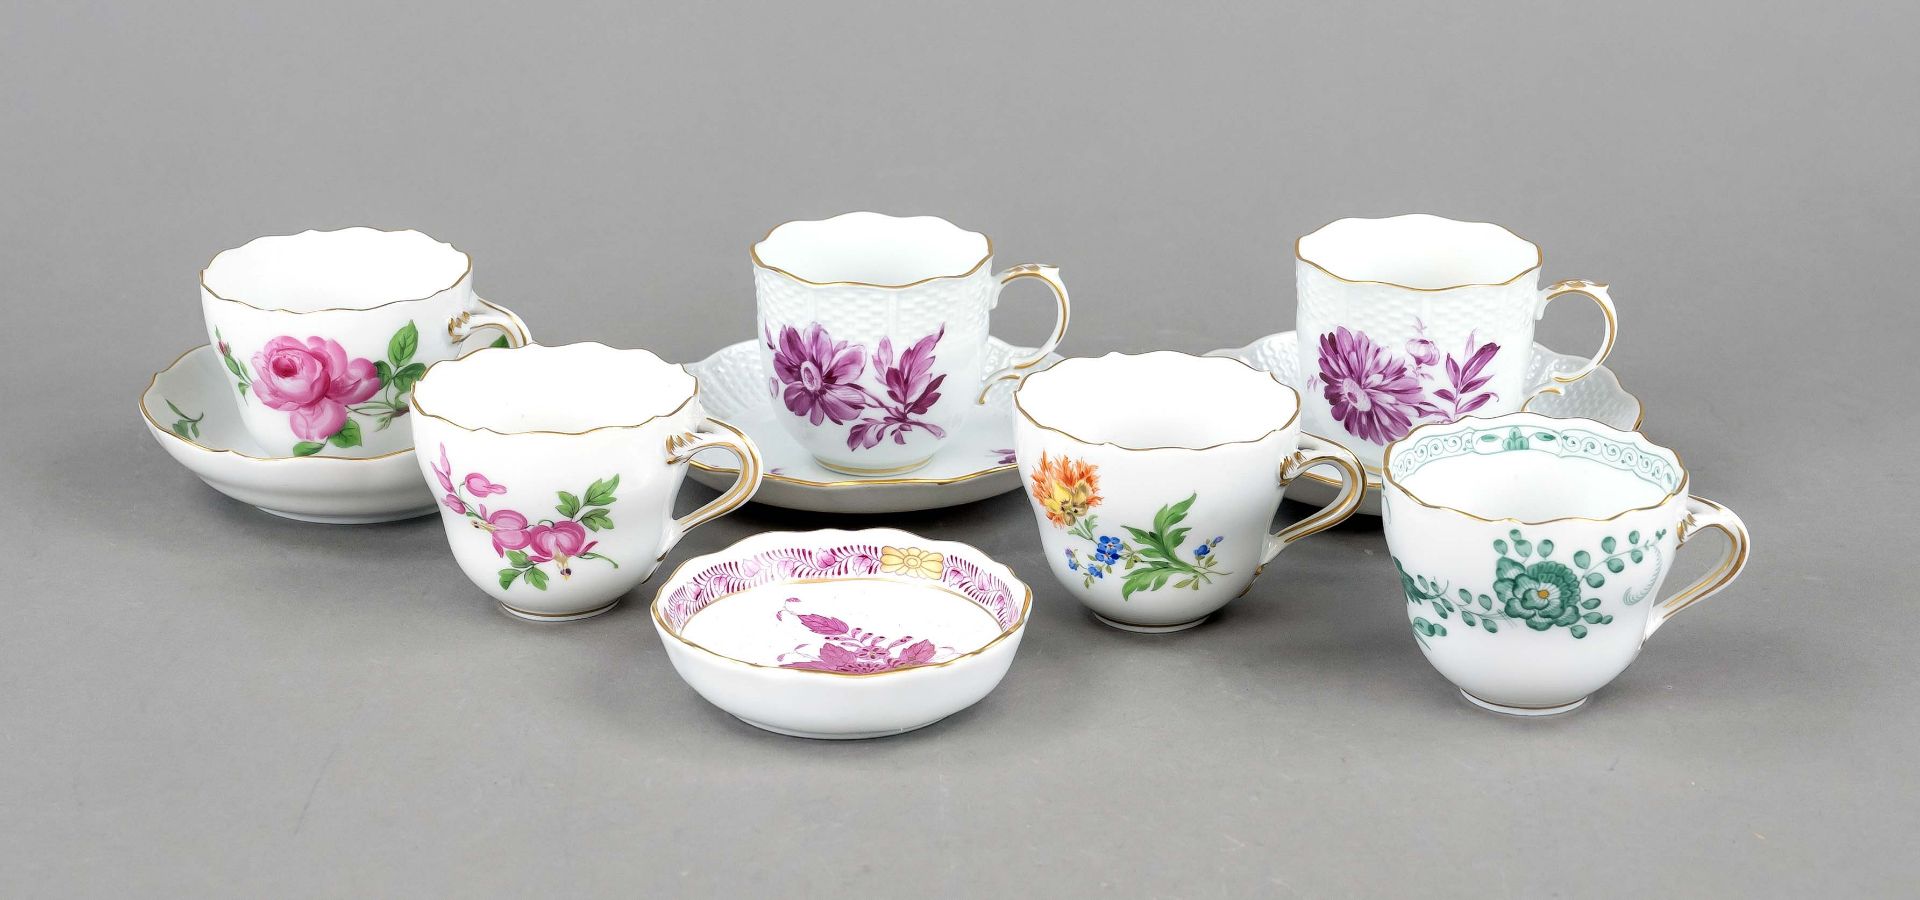 Mixed lot, 10 pieces, 20th century, 2 demitasse cups with saucers, Ludwigsburg, form Ozier, flower